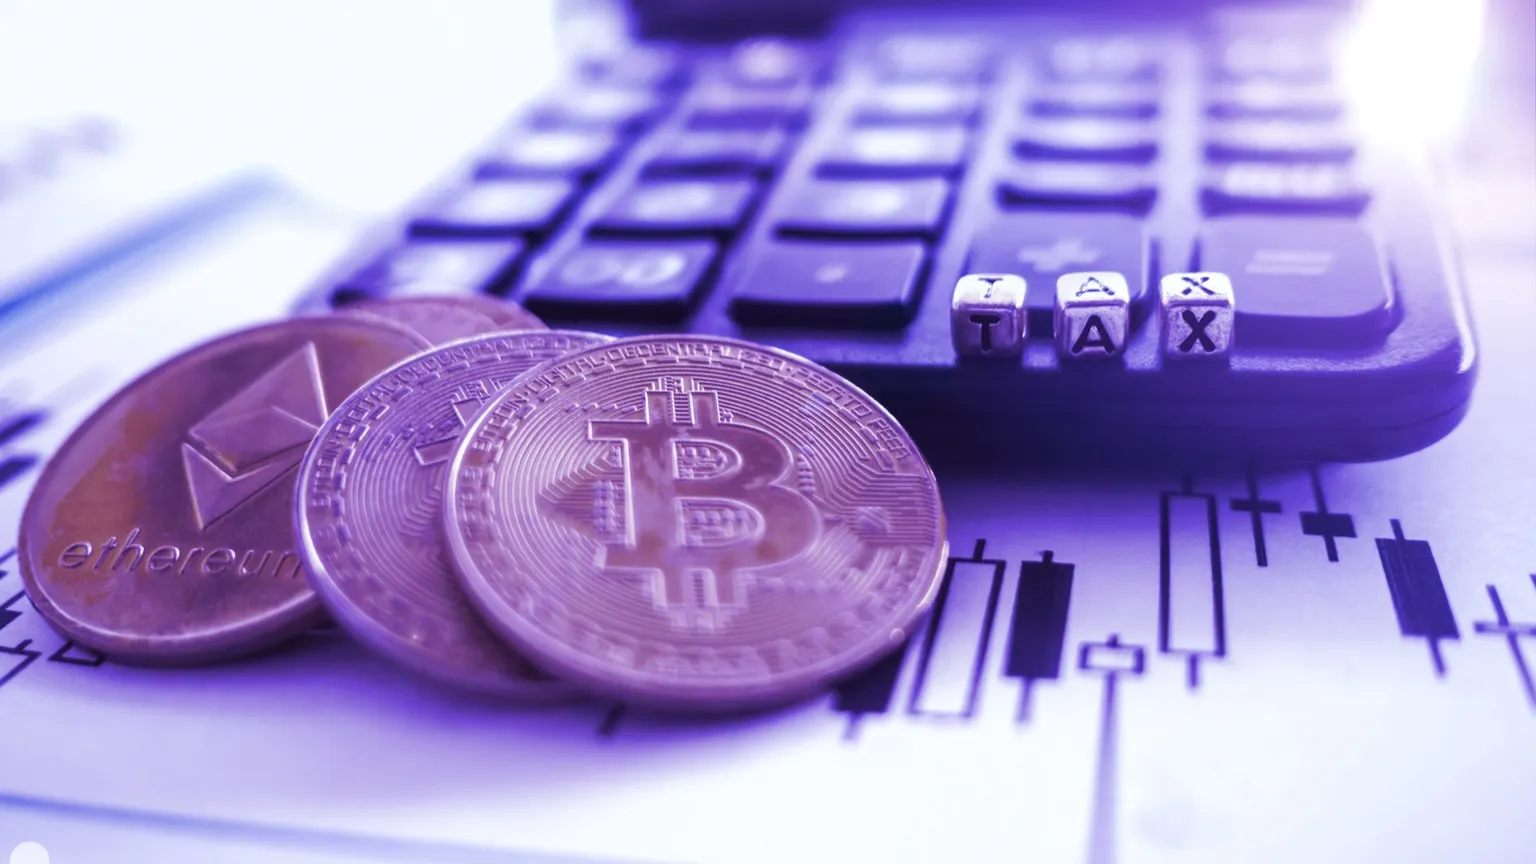 Taxing the crypto industry appropriately has been a controversial subject. Image: Shutterstock